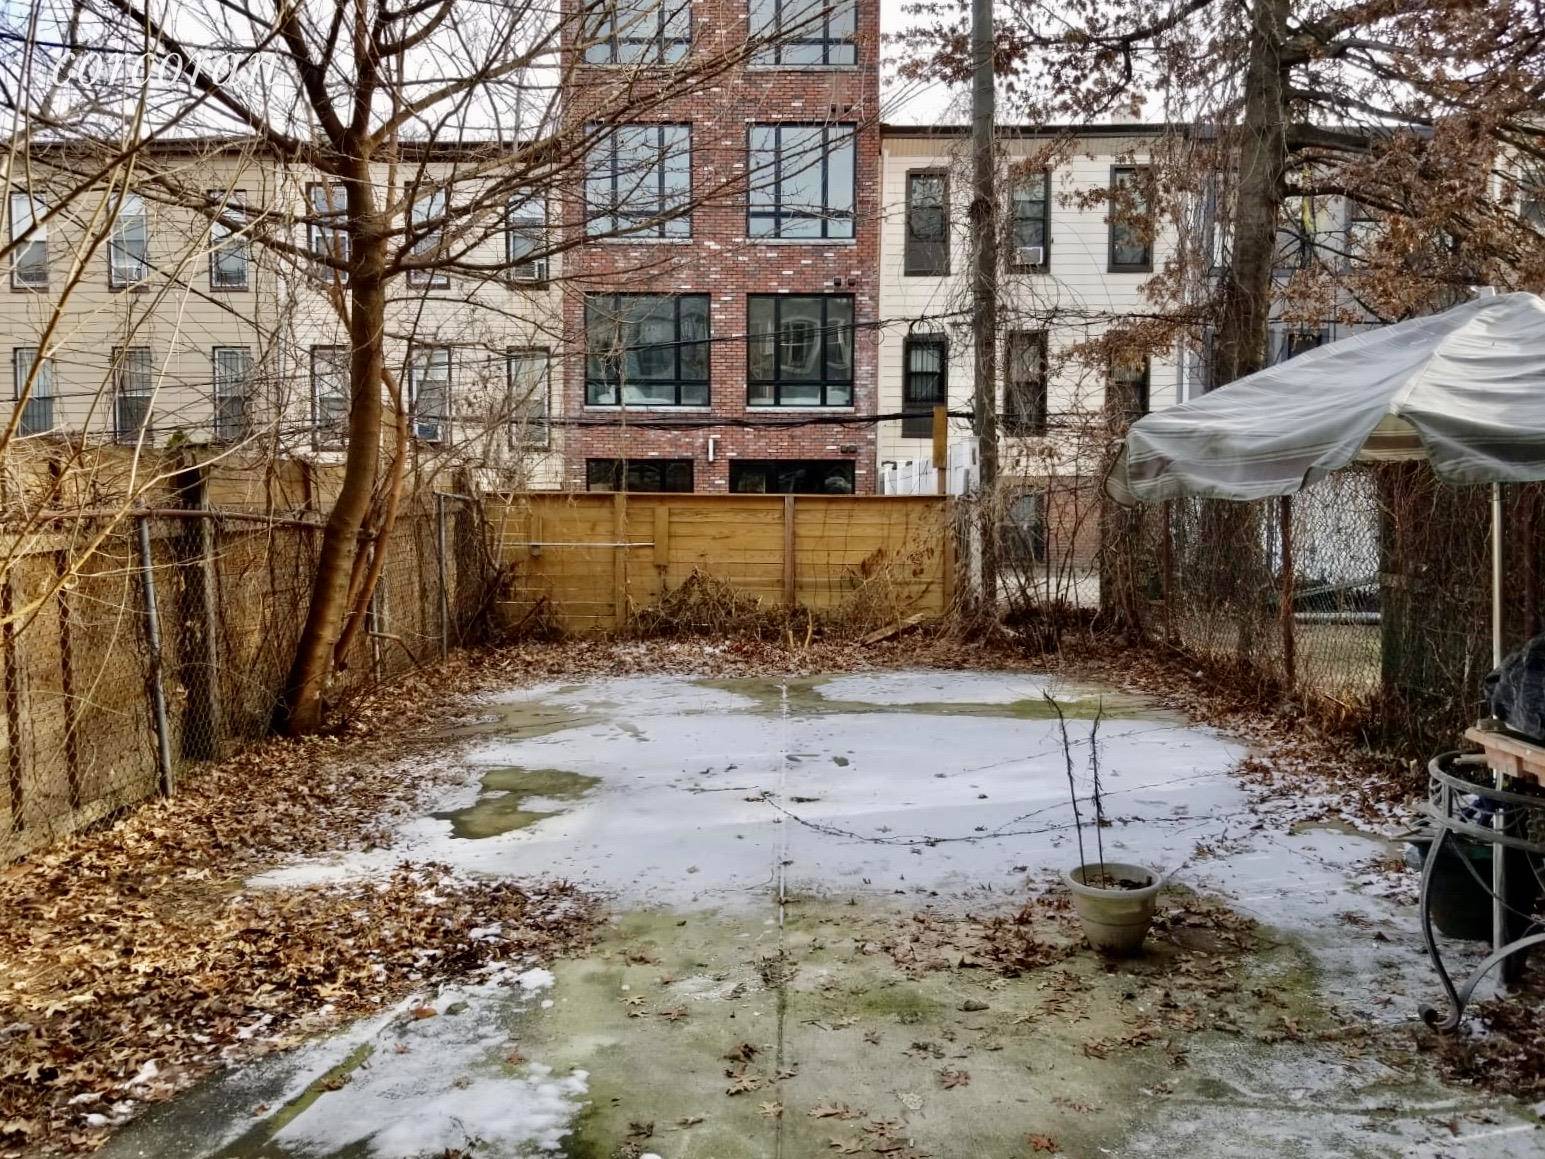 Ideal garden apartment w study office and PRIVATE 800 sf backyard in a Bushwick 3 family townhouse.